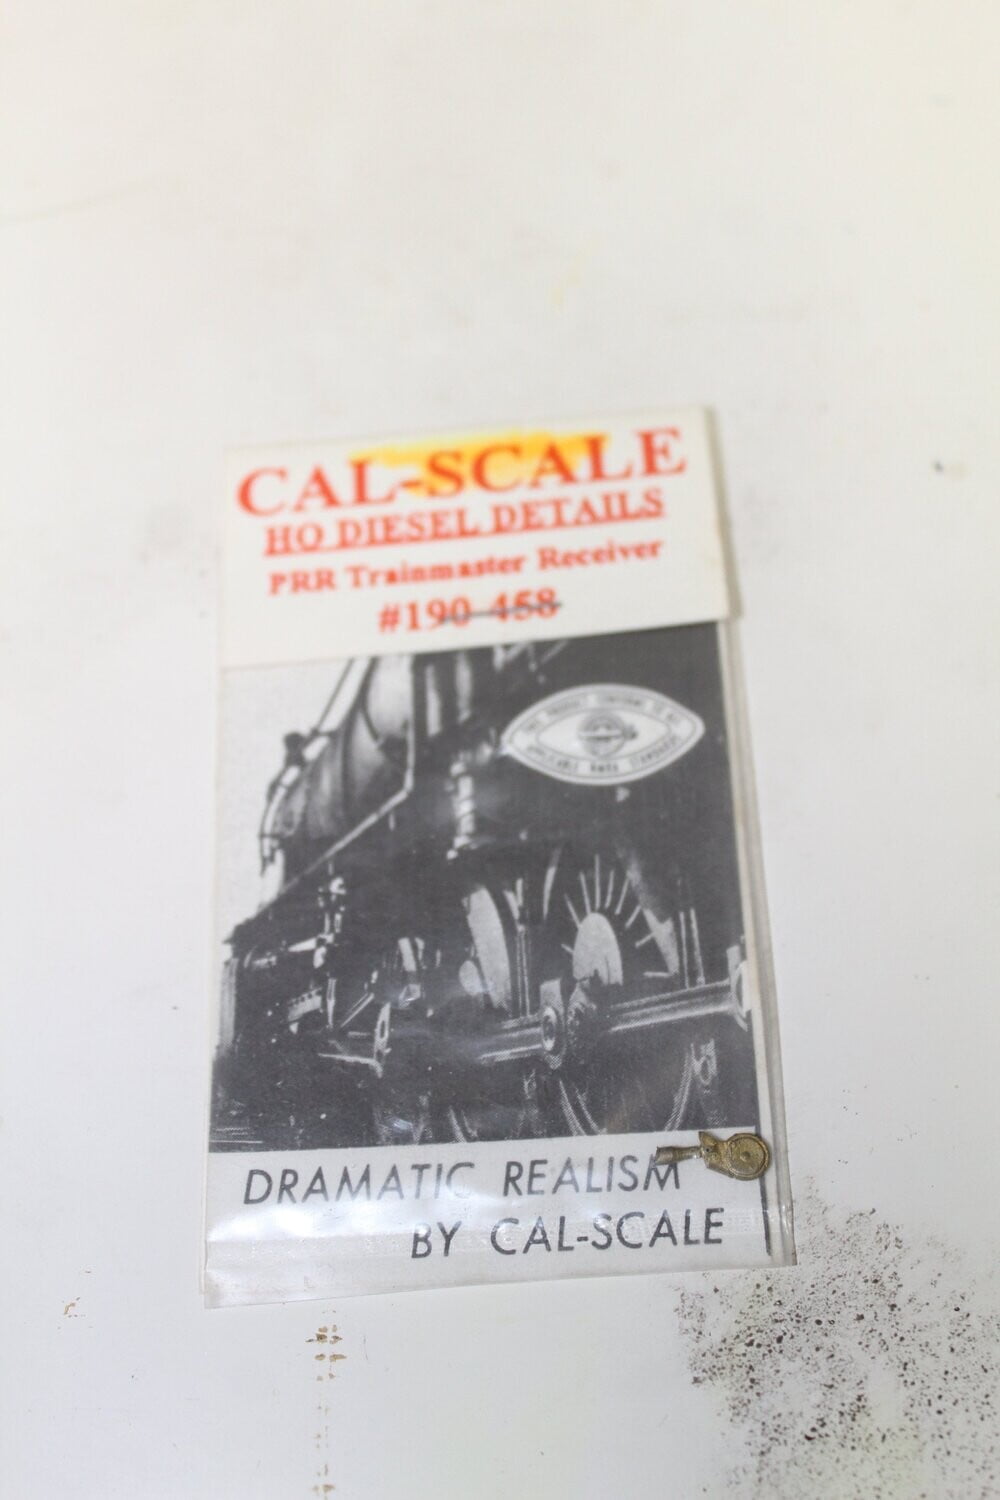 CAL SCALE 190-458 PRR TRAINMASTER RECEIVER